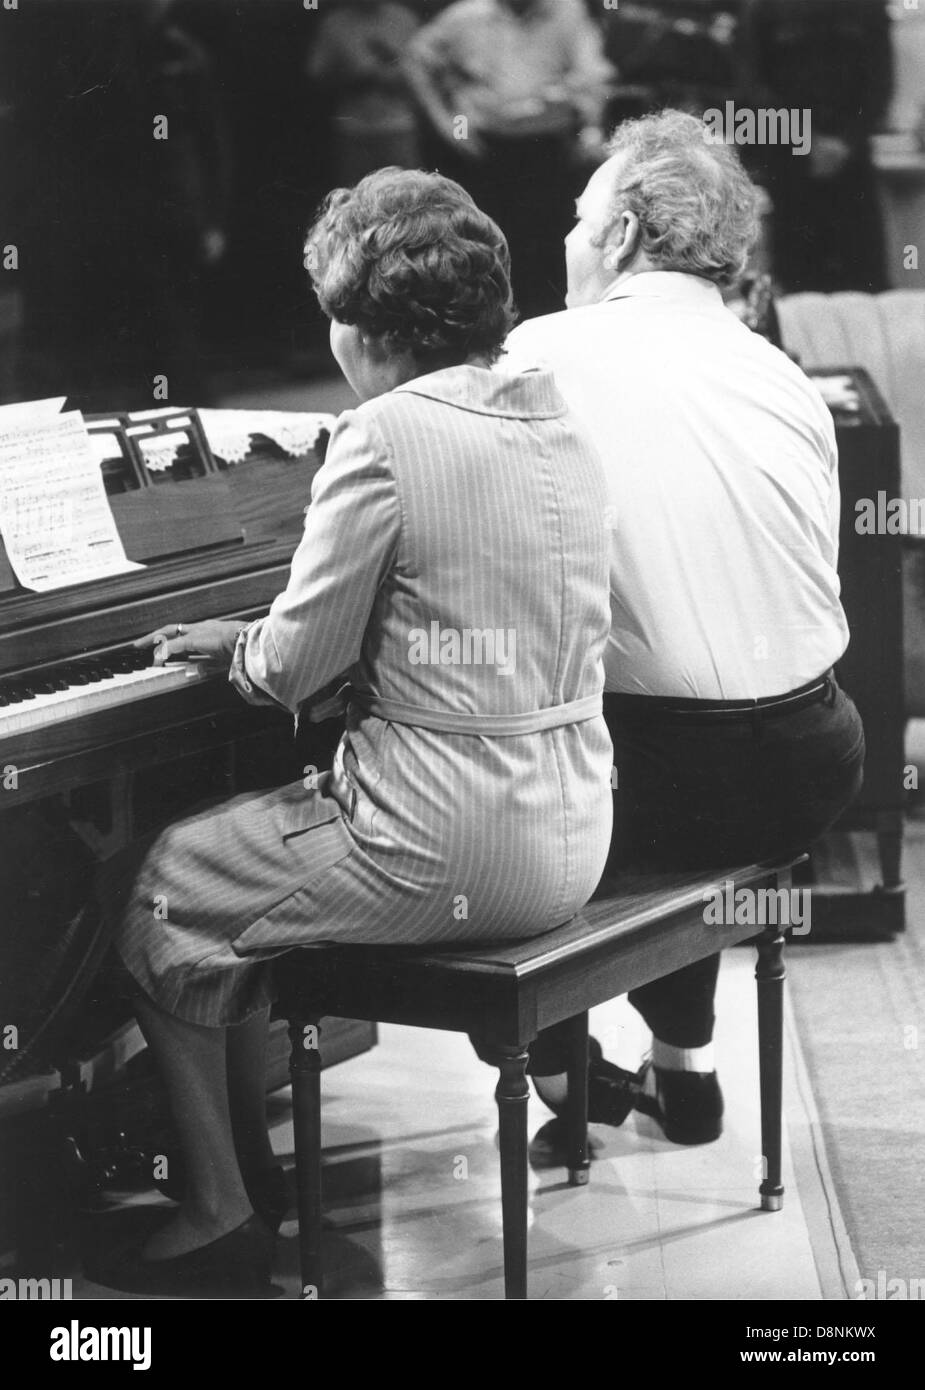 FILE PHOTO - JEAN STAPLETON, the veteran of stage and film best known as Archie Bunker's long-suffering wife Edith in the seminal TV series 'All In The Family,' died Friday May 31, 2013 at her home in New York City. She was 90. PICTURED: Jan. 1, 1971 - Los Angeles, California, U.S. - JEAN STAPLETON and CARROLL O'CONNOR in an undated still from 'All In The Family.' (Credit Image: © Globe Photos/ZUMAPRESS.com) Stock Photo